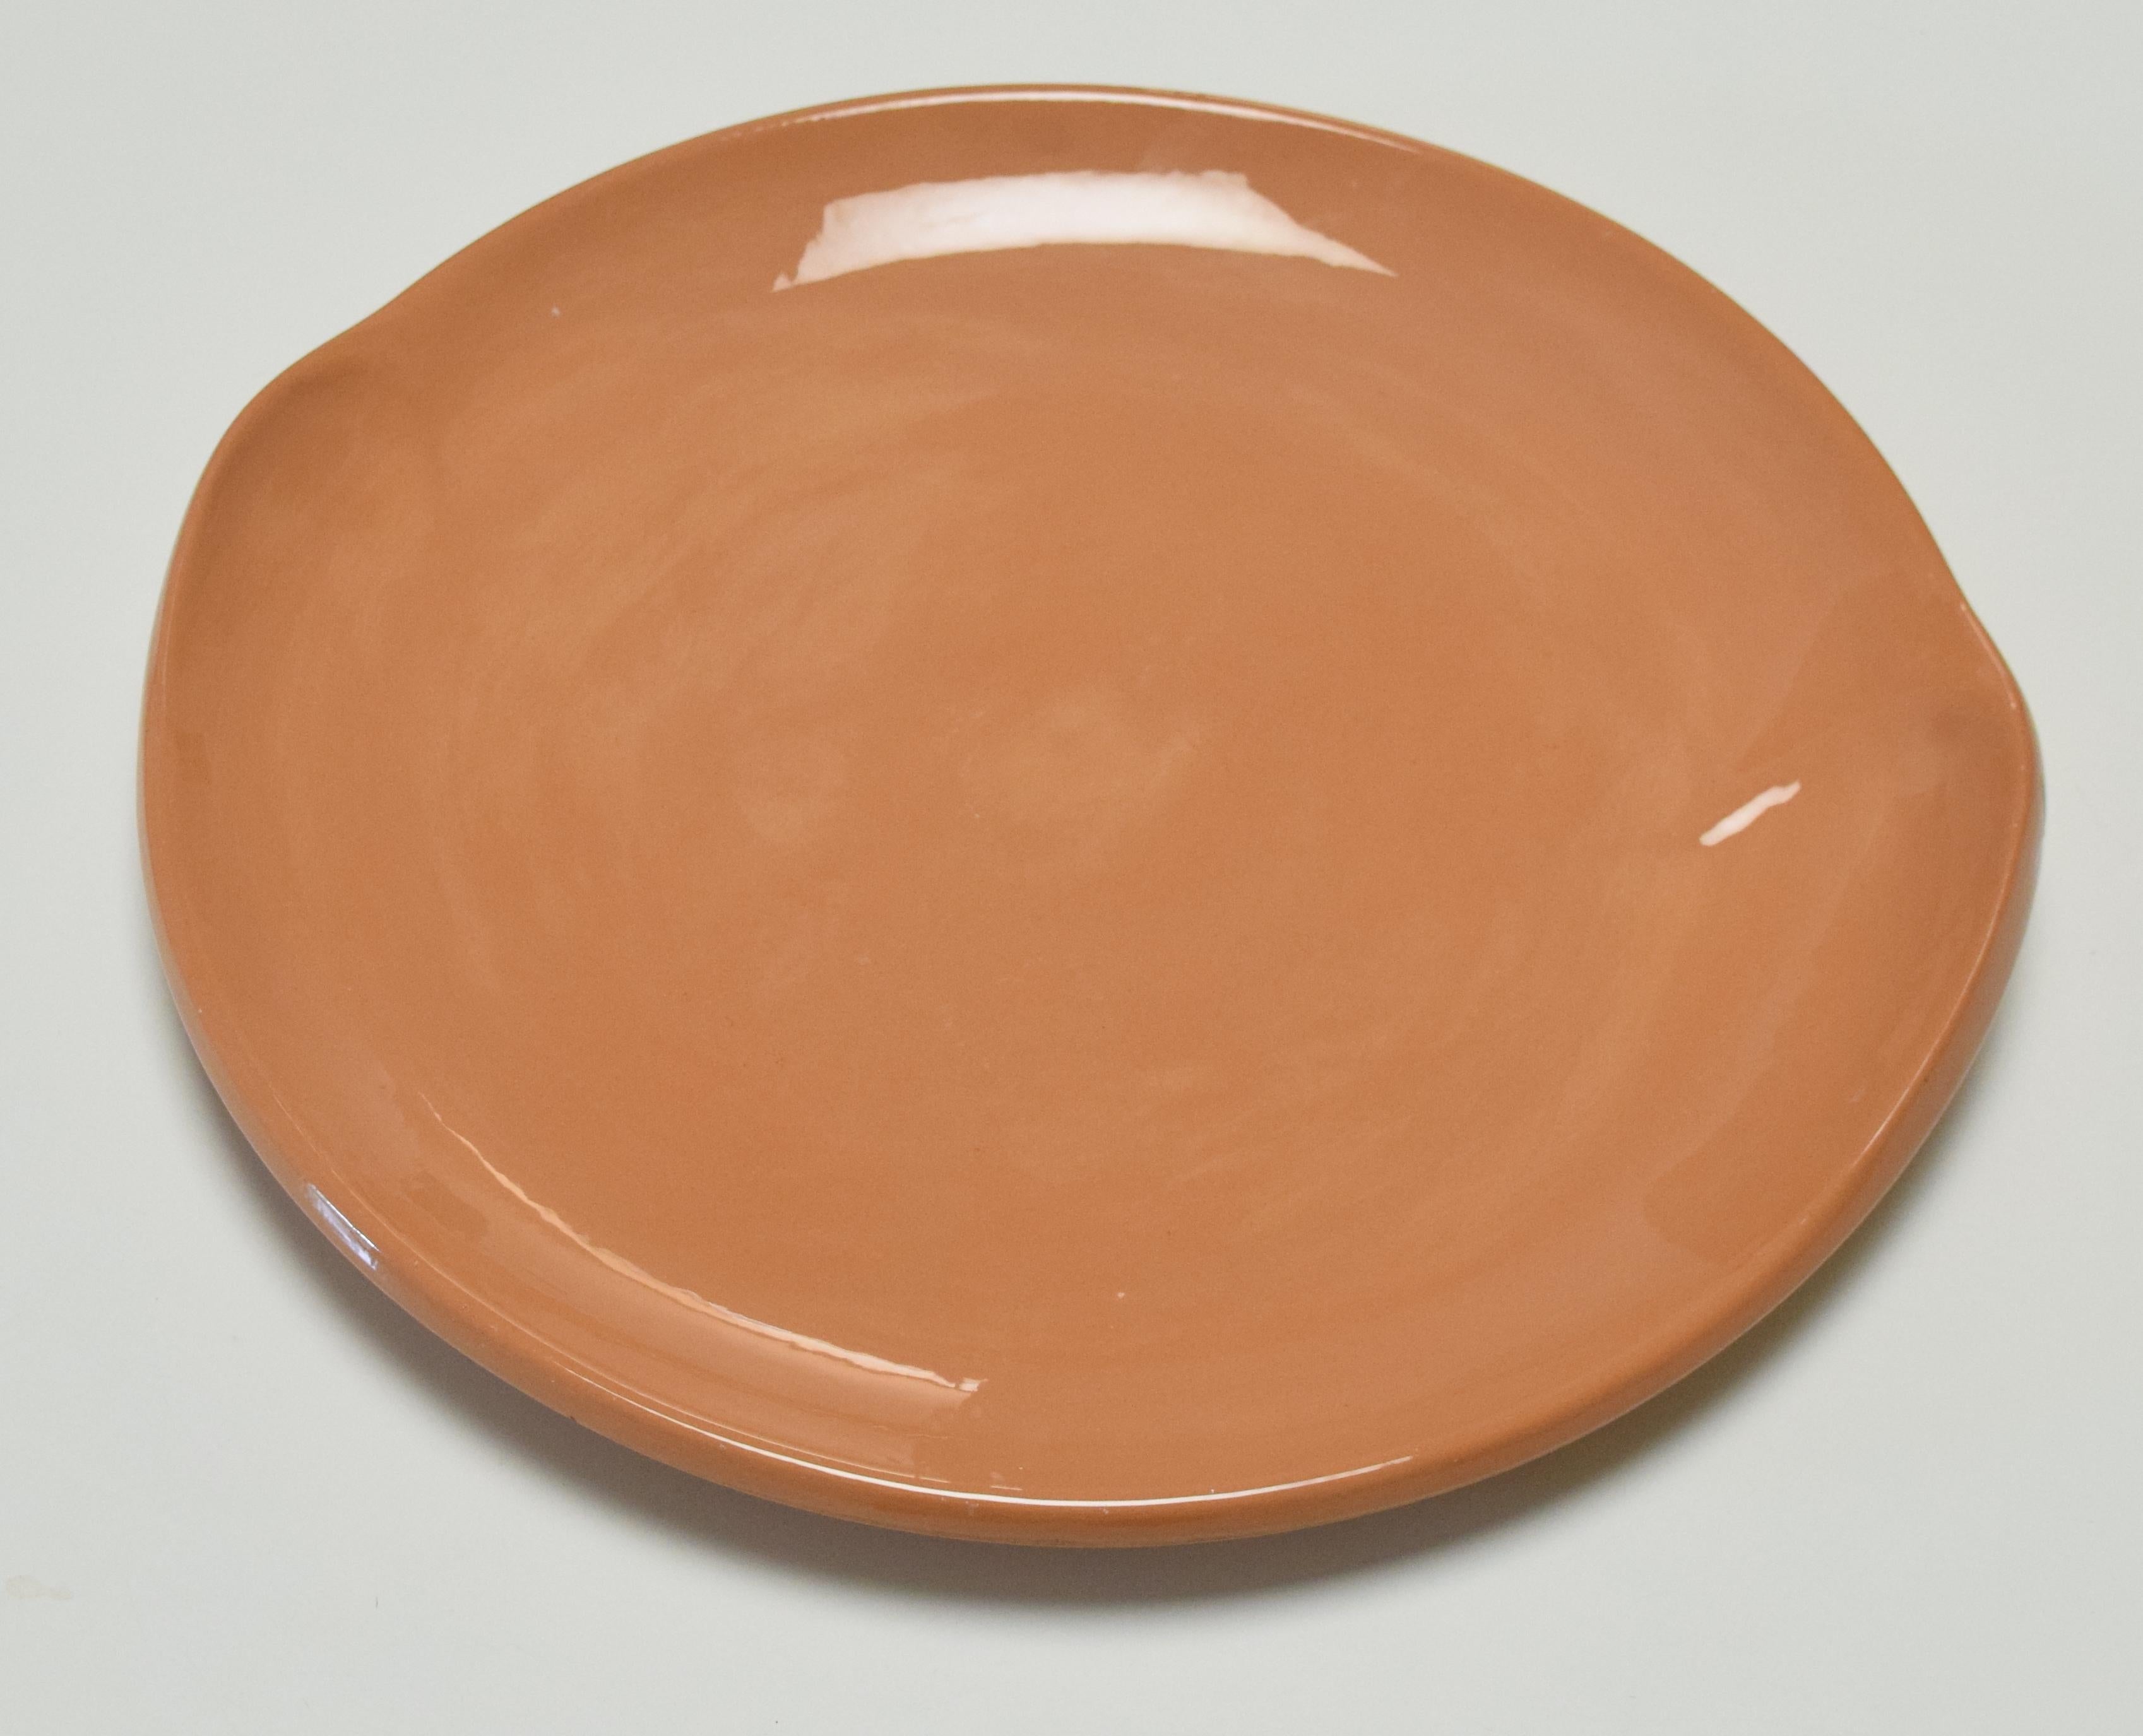 Store closing. Offers welcome! Vintage terracotta serving piece made in Italy by Elsa Peretti for Tiffany & Co., oversized and gorgeous! Additional Peretti platters currently in inventory; please contact for details and availability.